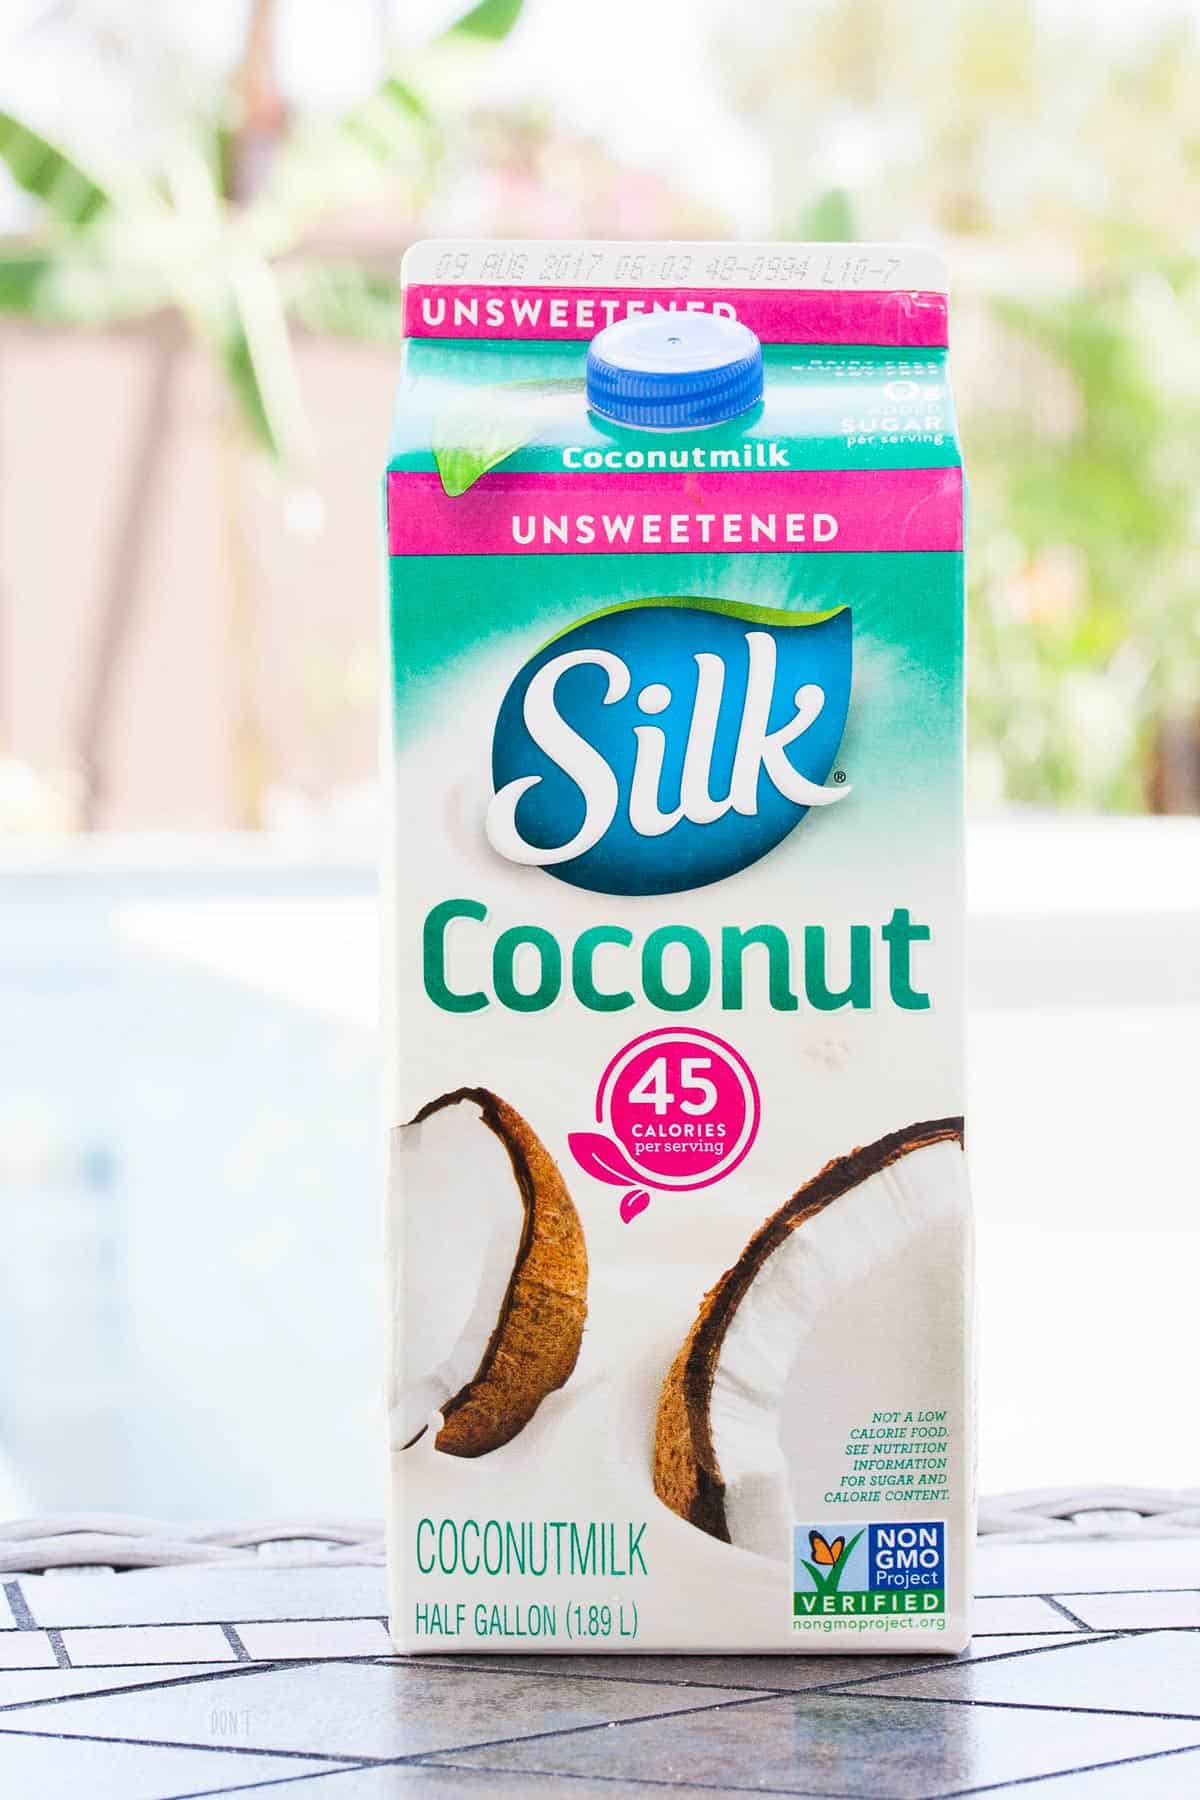 Pink, green and white carton of Silk brand coconut milk